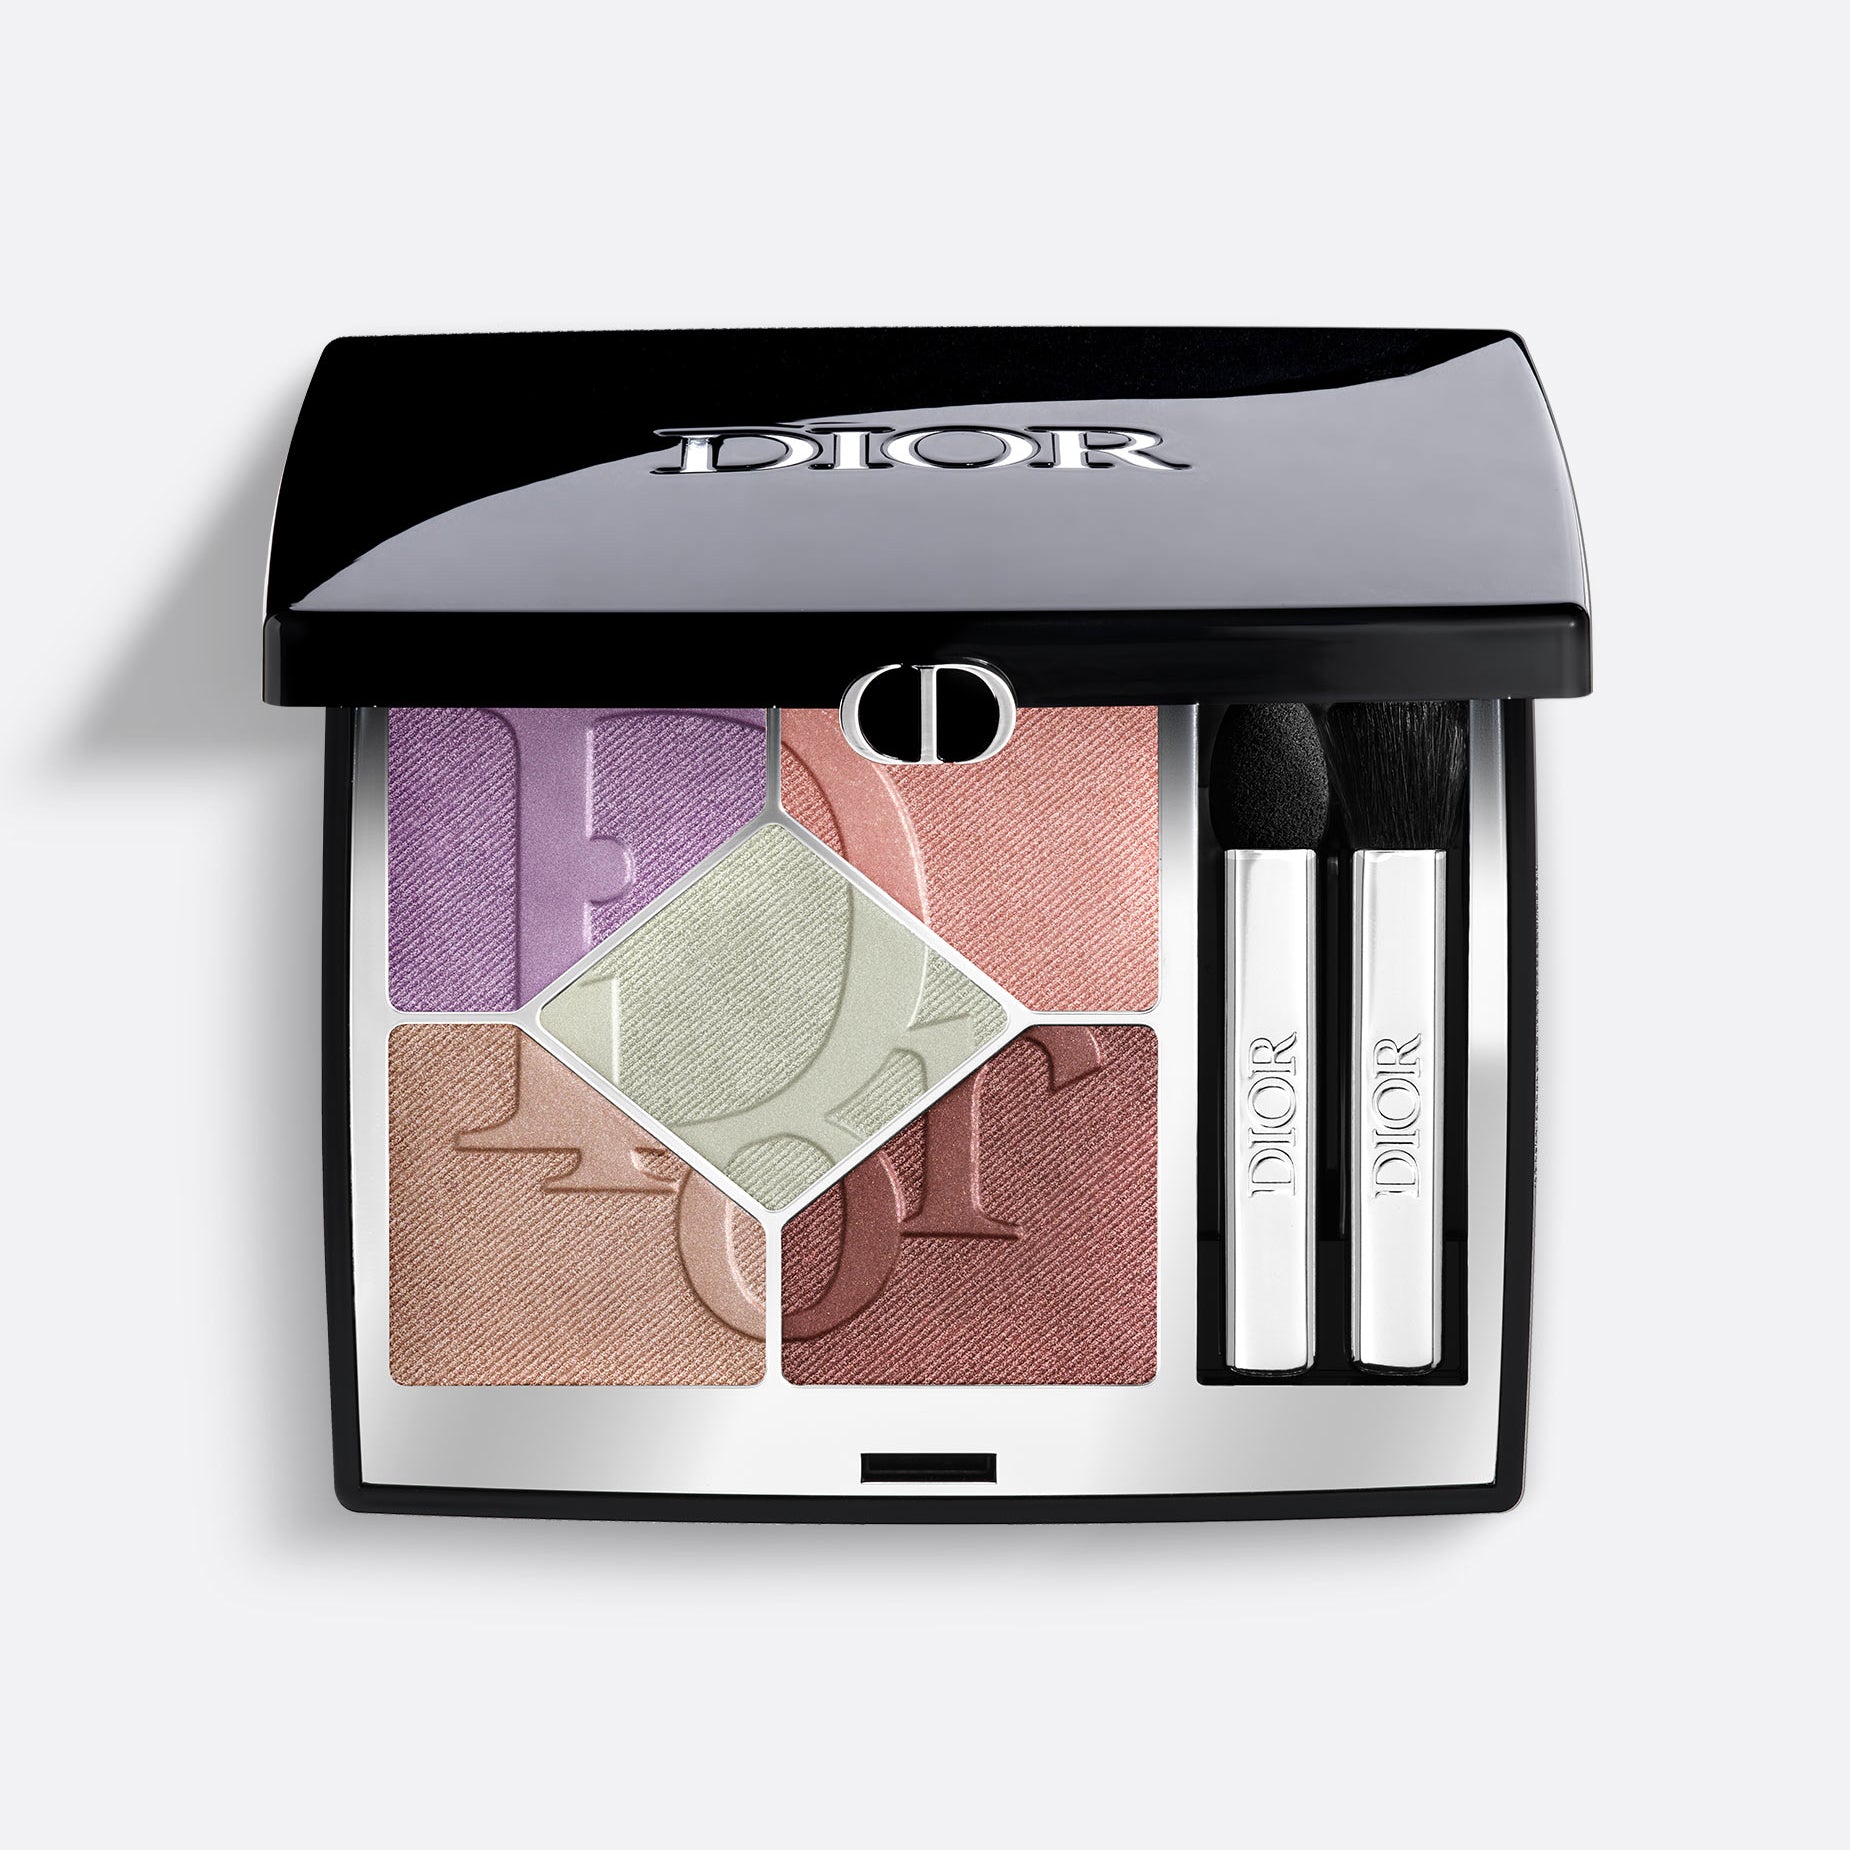 DIORSHOW 5 COULEURS ~ High Color Eyeshadow Wardrobe - Limited Edition